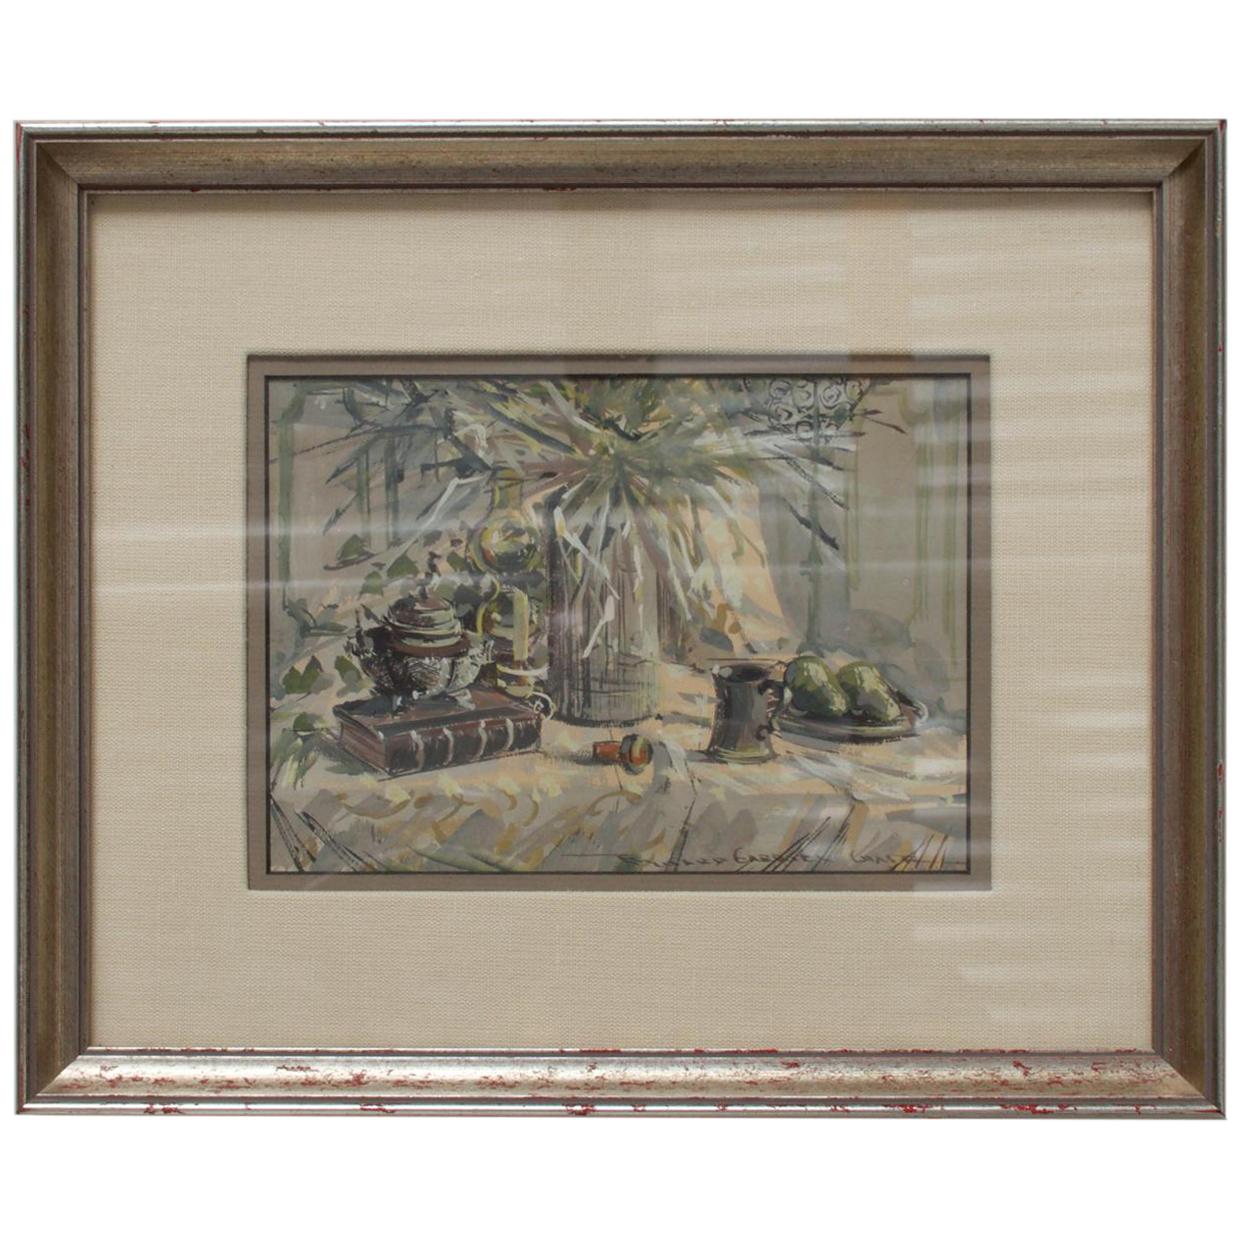 Asian Boats Vintage Original Artwork Original Signed Watercolor Painting in Mid Century Frame